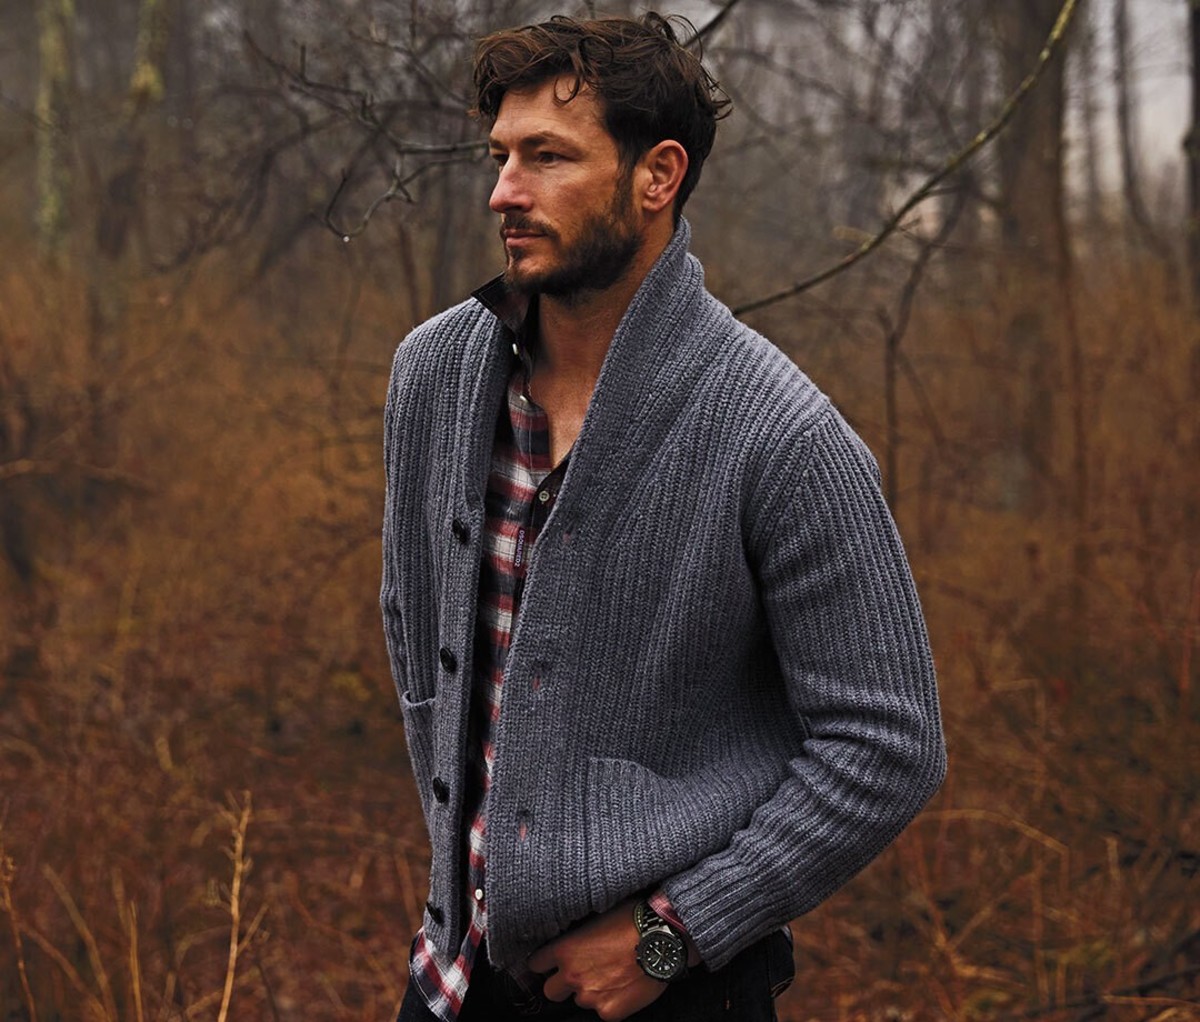 A man in the woods wearing a shirt and cardigan sweater